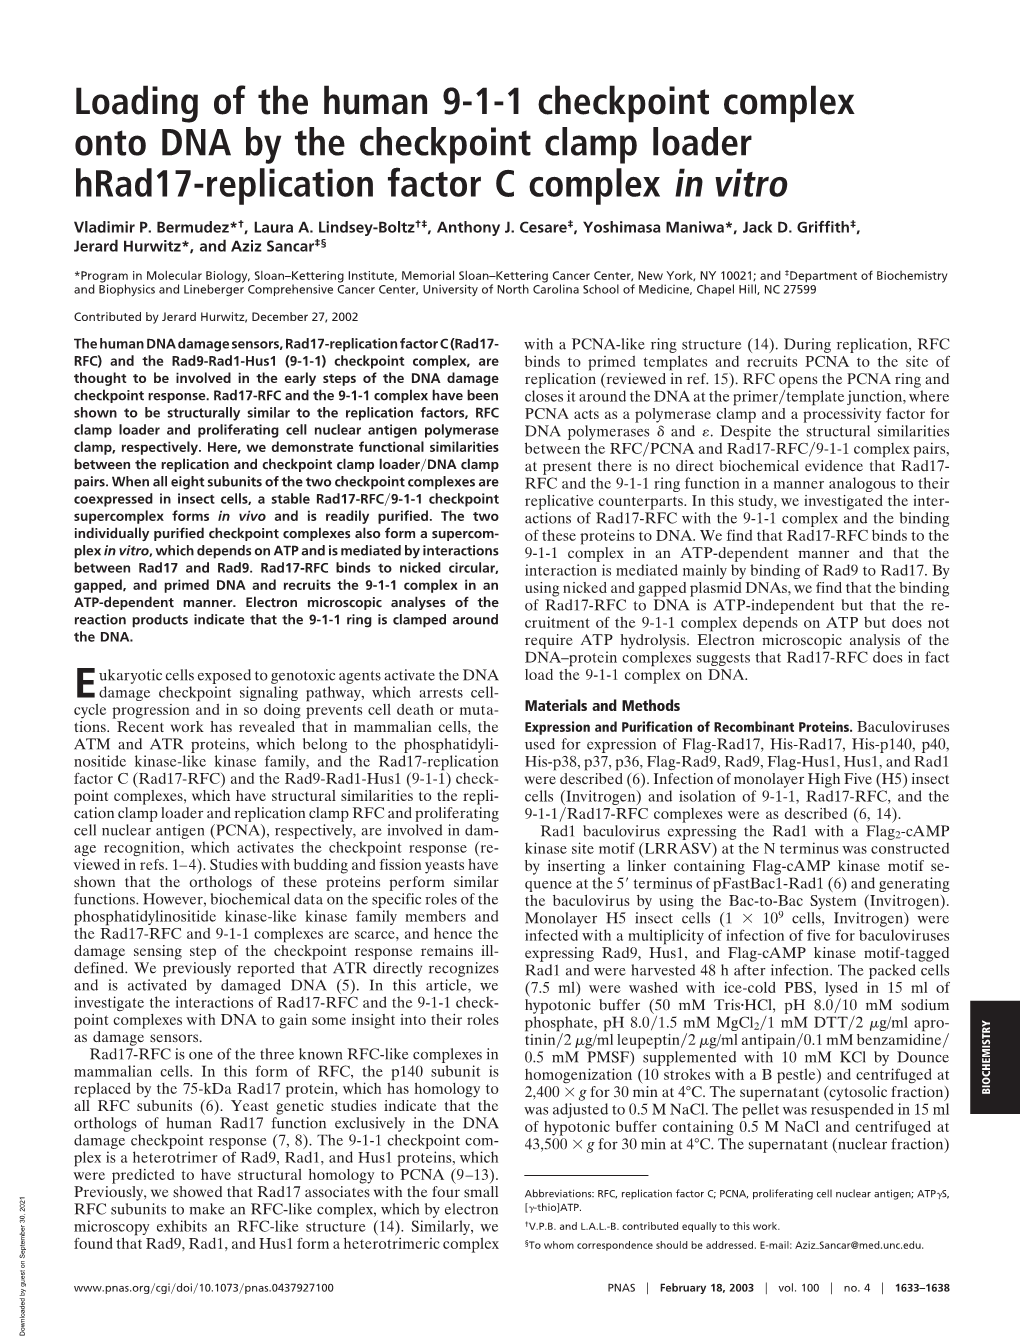 Loading of the Human 9-1-1 Checkpoint Complex Onto DNA by the Checkpoint Clamp Loader Hrad17-Replication Factor C Complex in Vitro